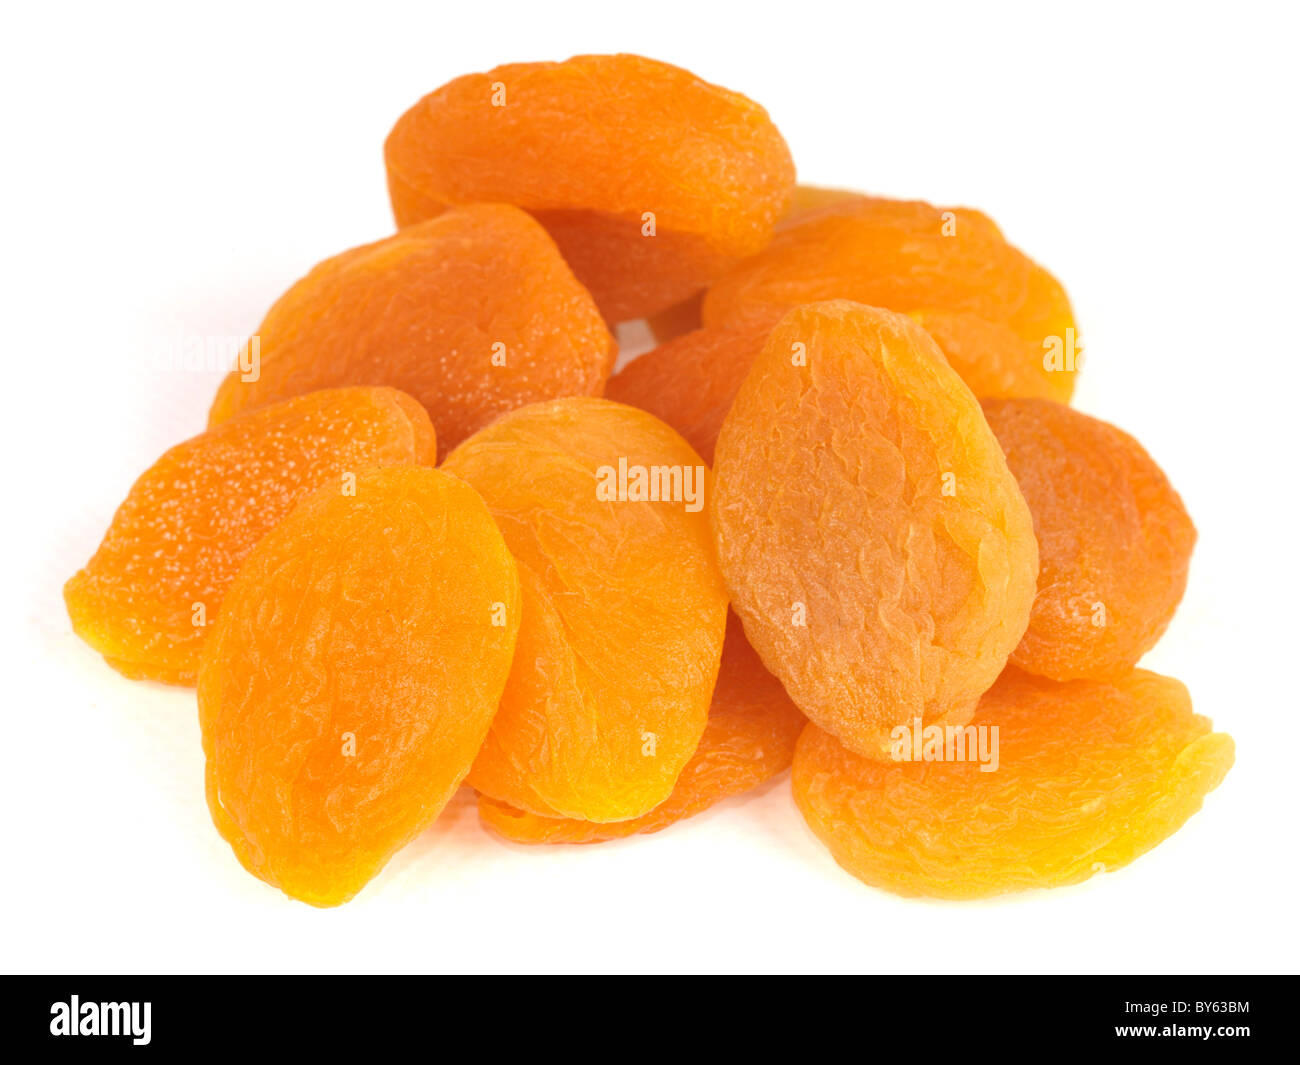 A Handful Or Stack Of Healthy Dried Apricots Fruit Snack Against A White Background With No People And A Clipping Path Stock Photo